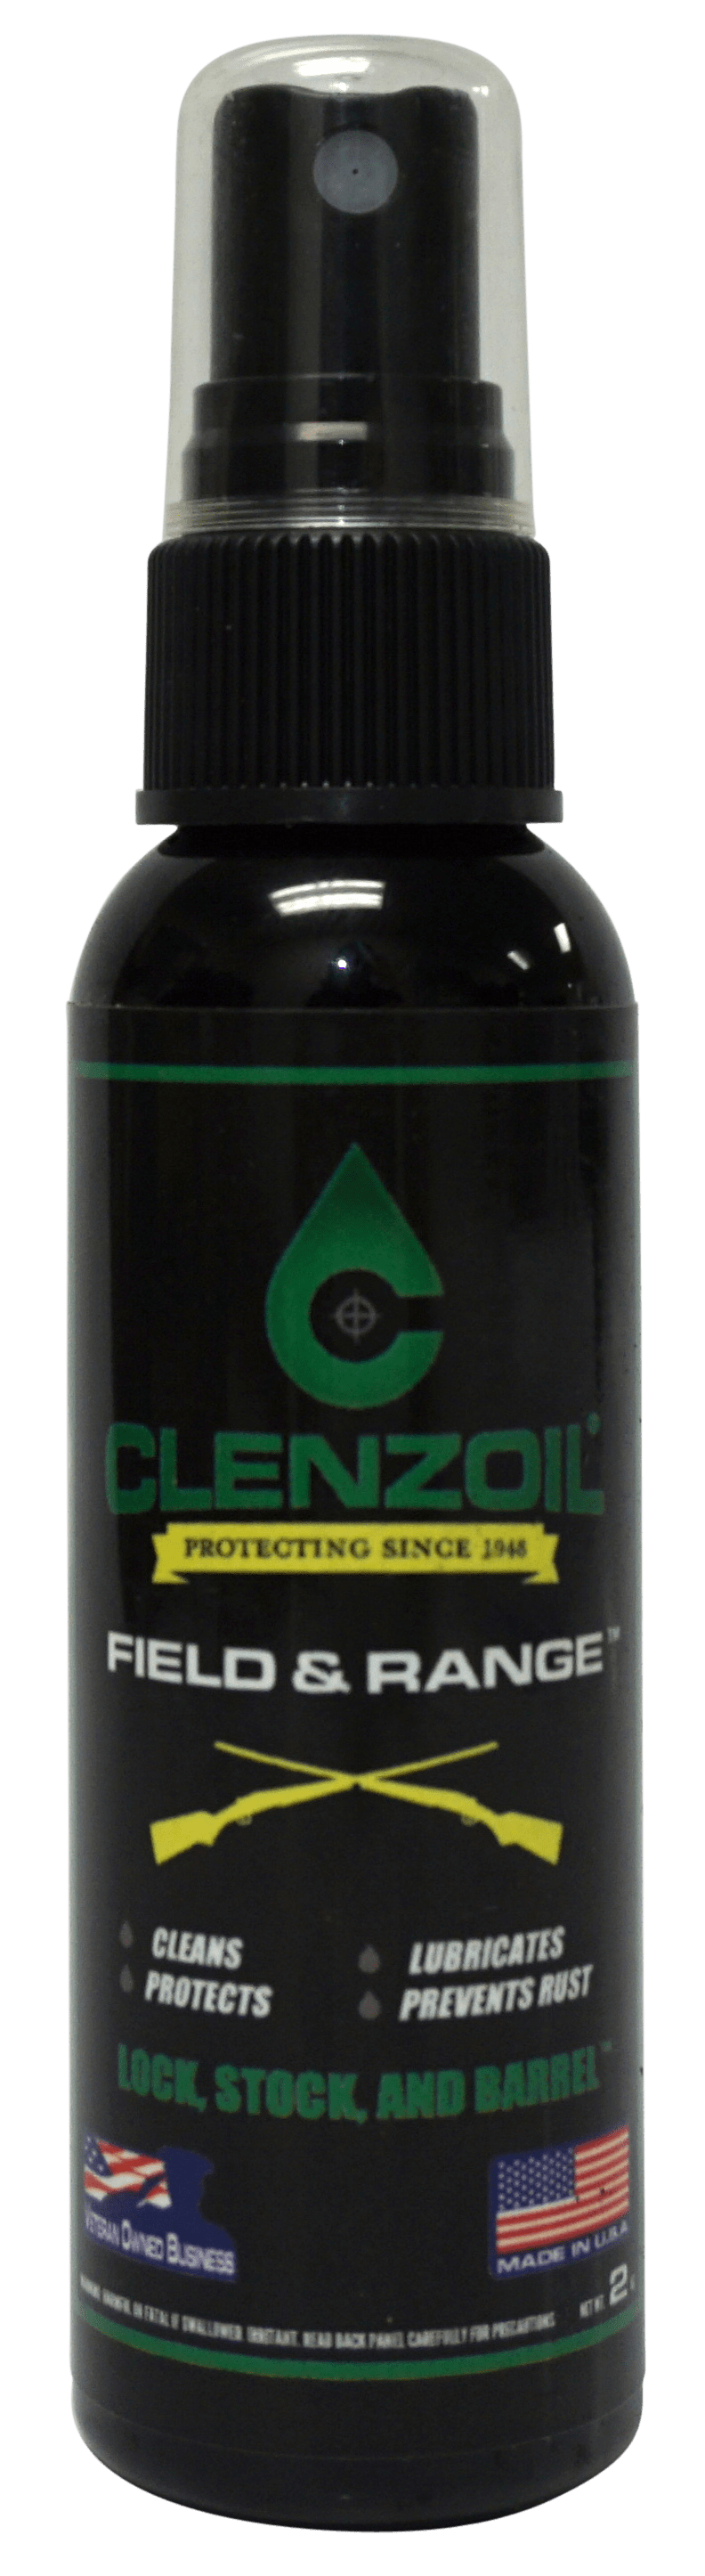 Clenzoil Clenzoil Field & Range Solution Sprayer 2 Oz. Shooting Gear and Acc